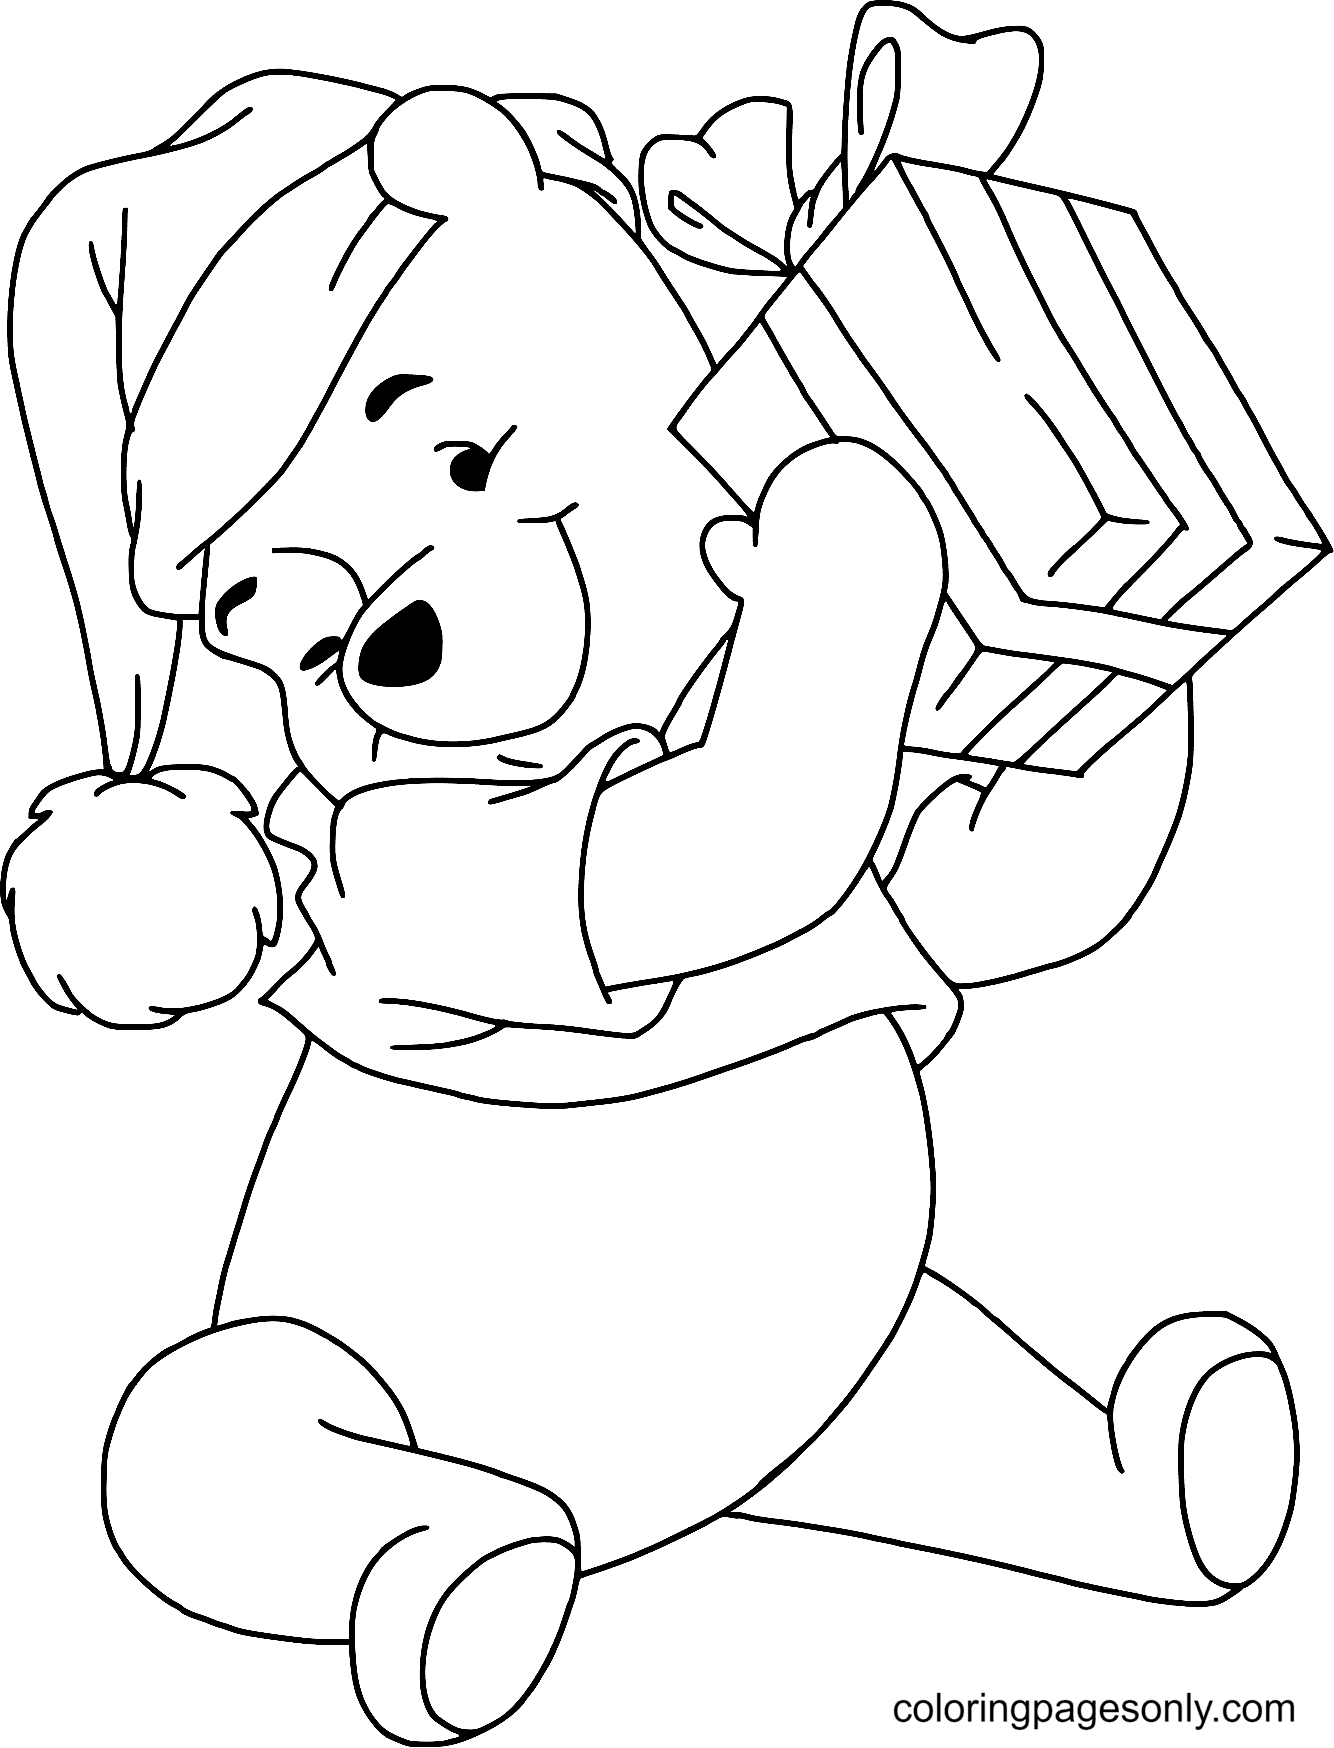 Winnie Present Coloring Pages   Disney Christmas Coloring Pages ...